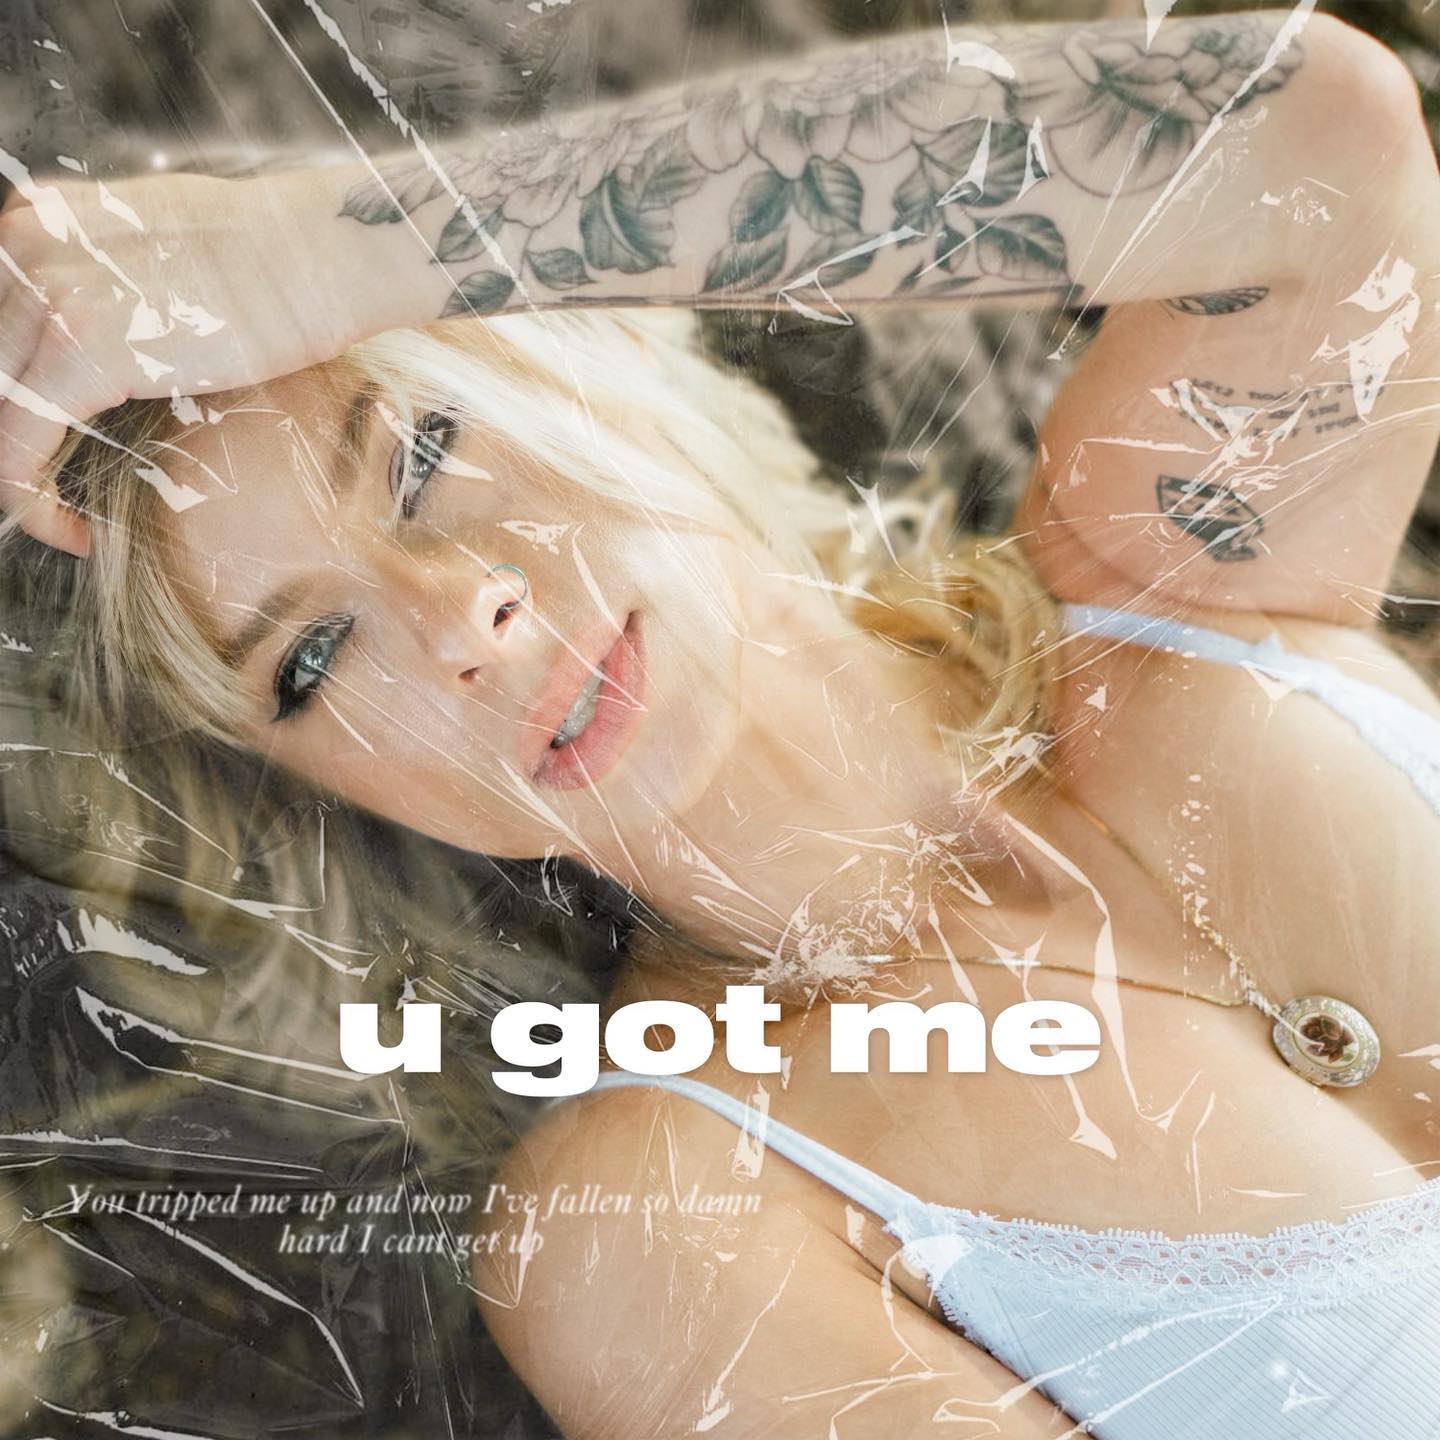 Pre-save #UGotMe out 9/30 (link in bio)🤩 this ones really special to me. Can’t wait for y’all to hear 💗